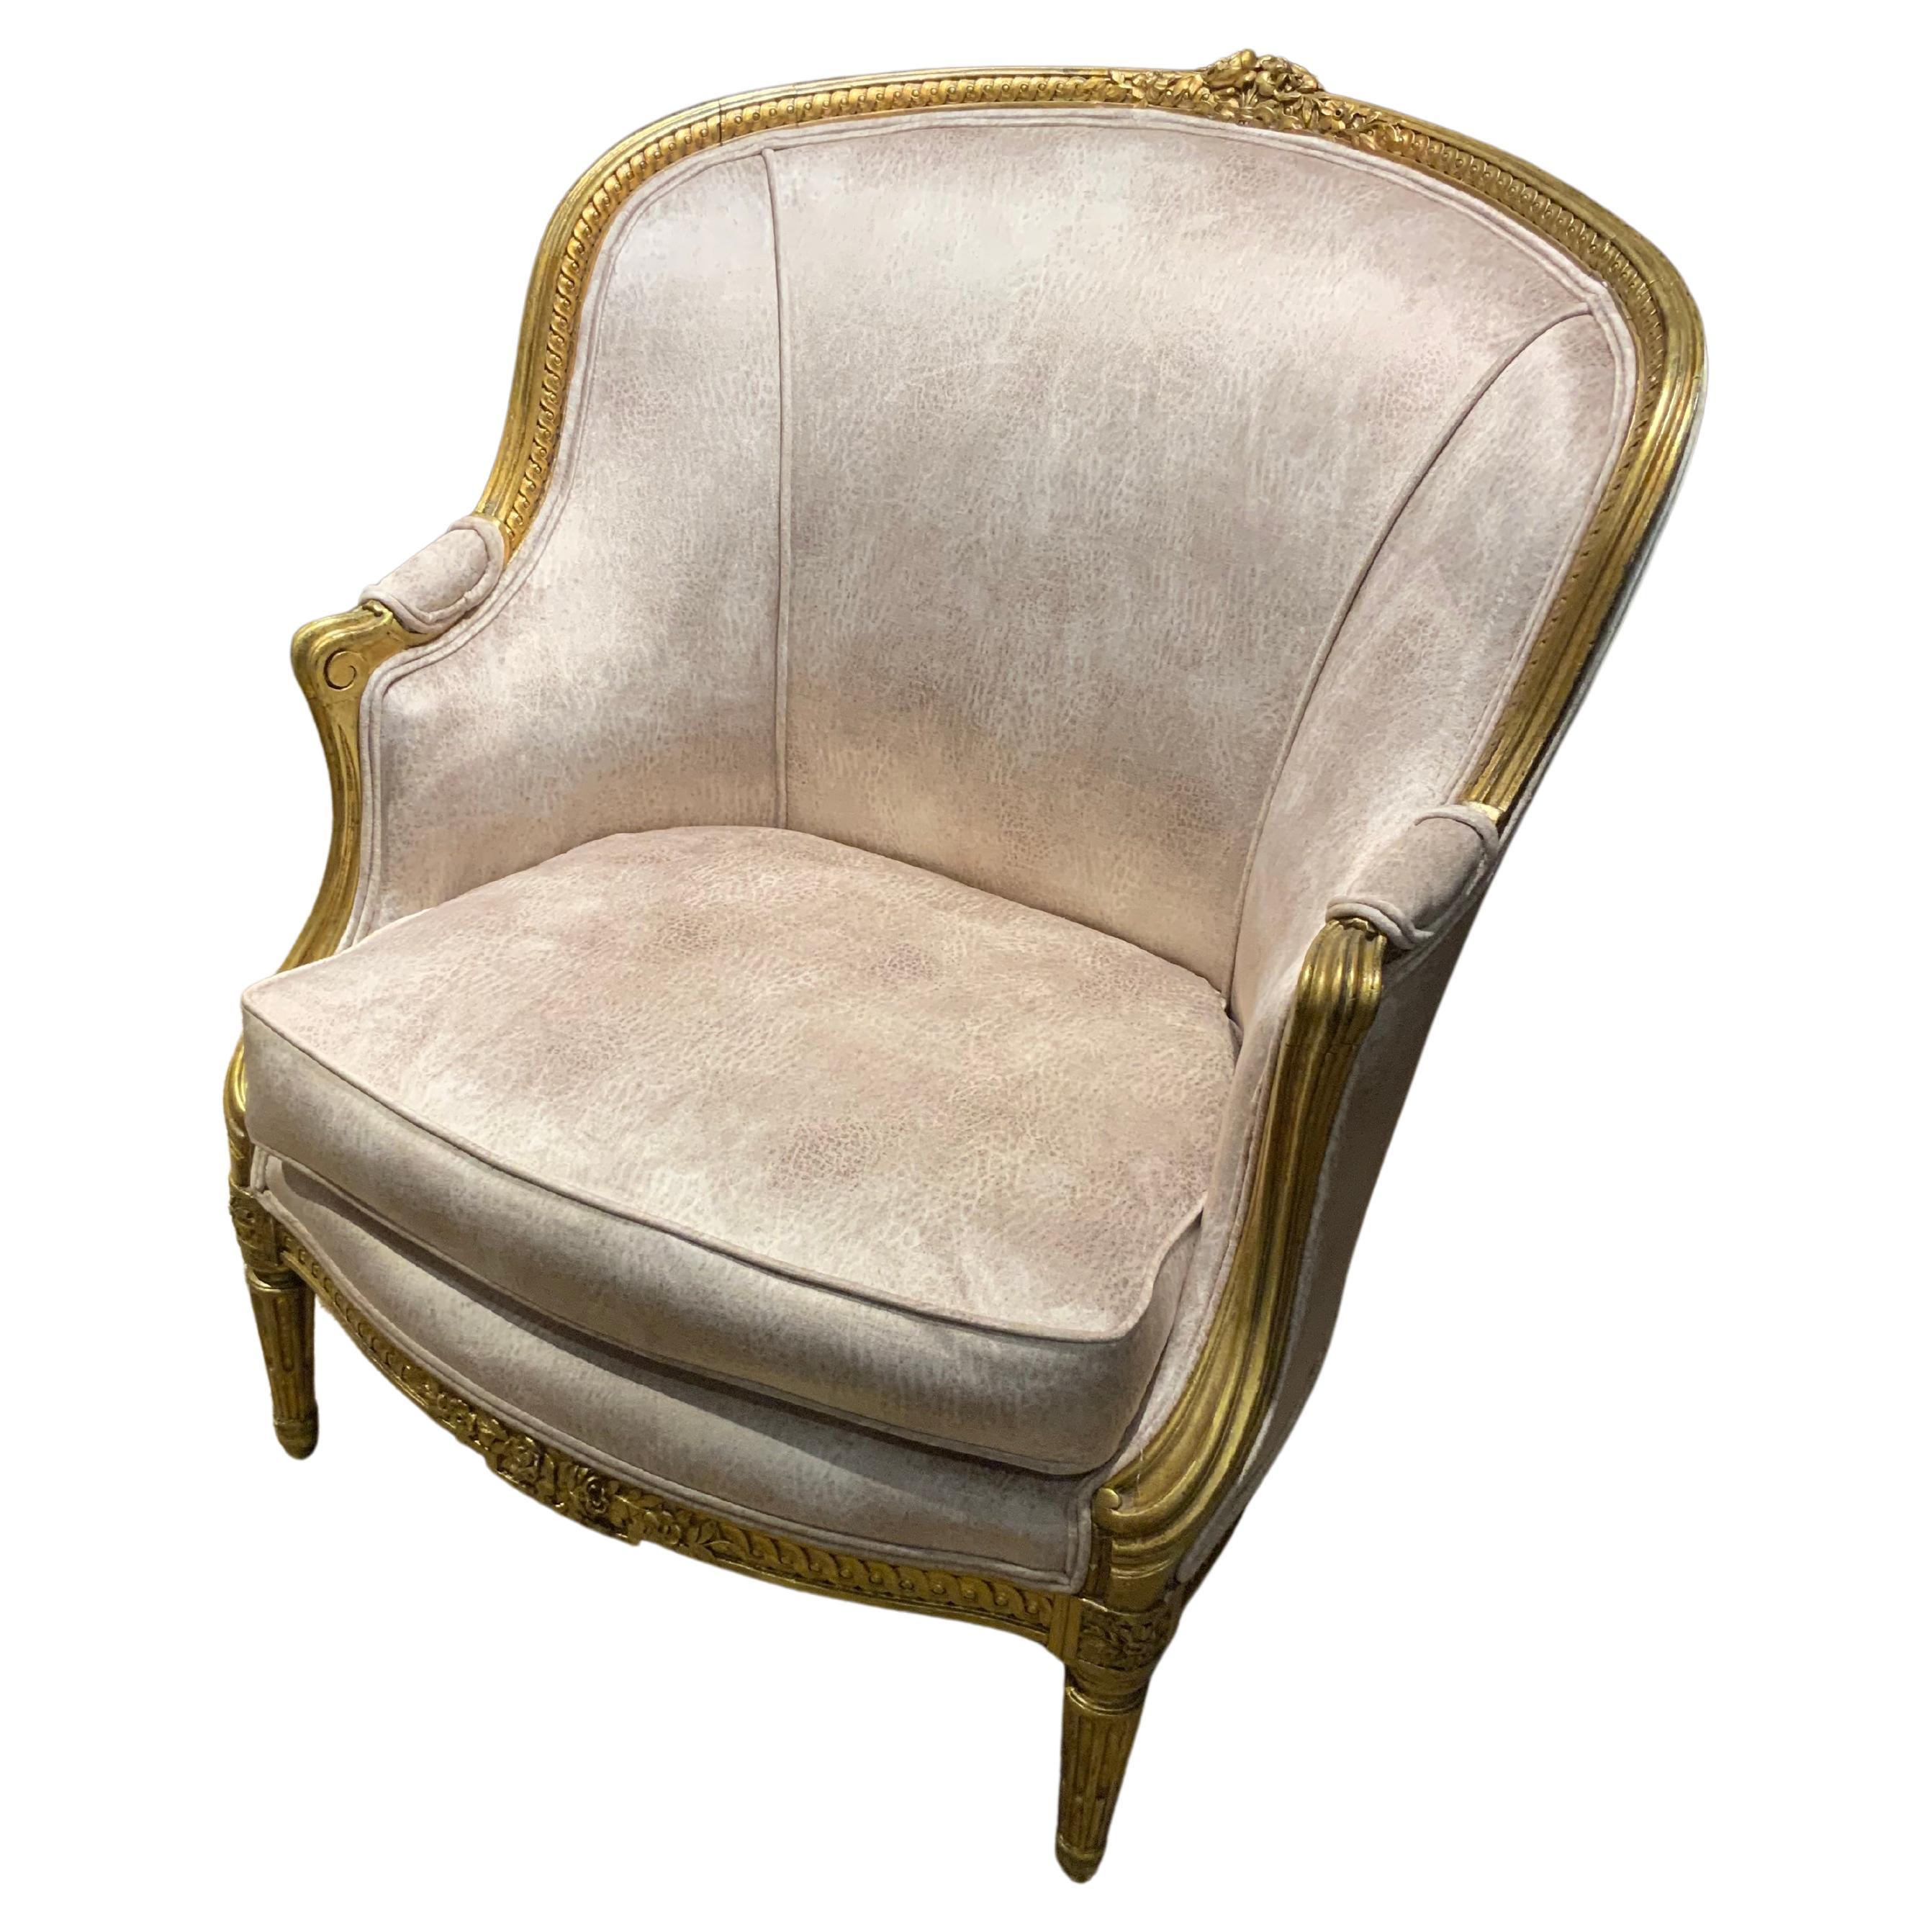 French Giltwood Bergere Chair, 19th Century